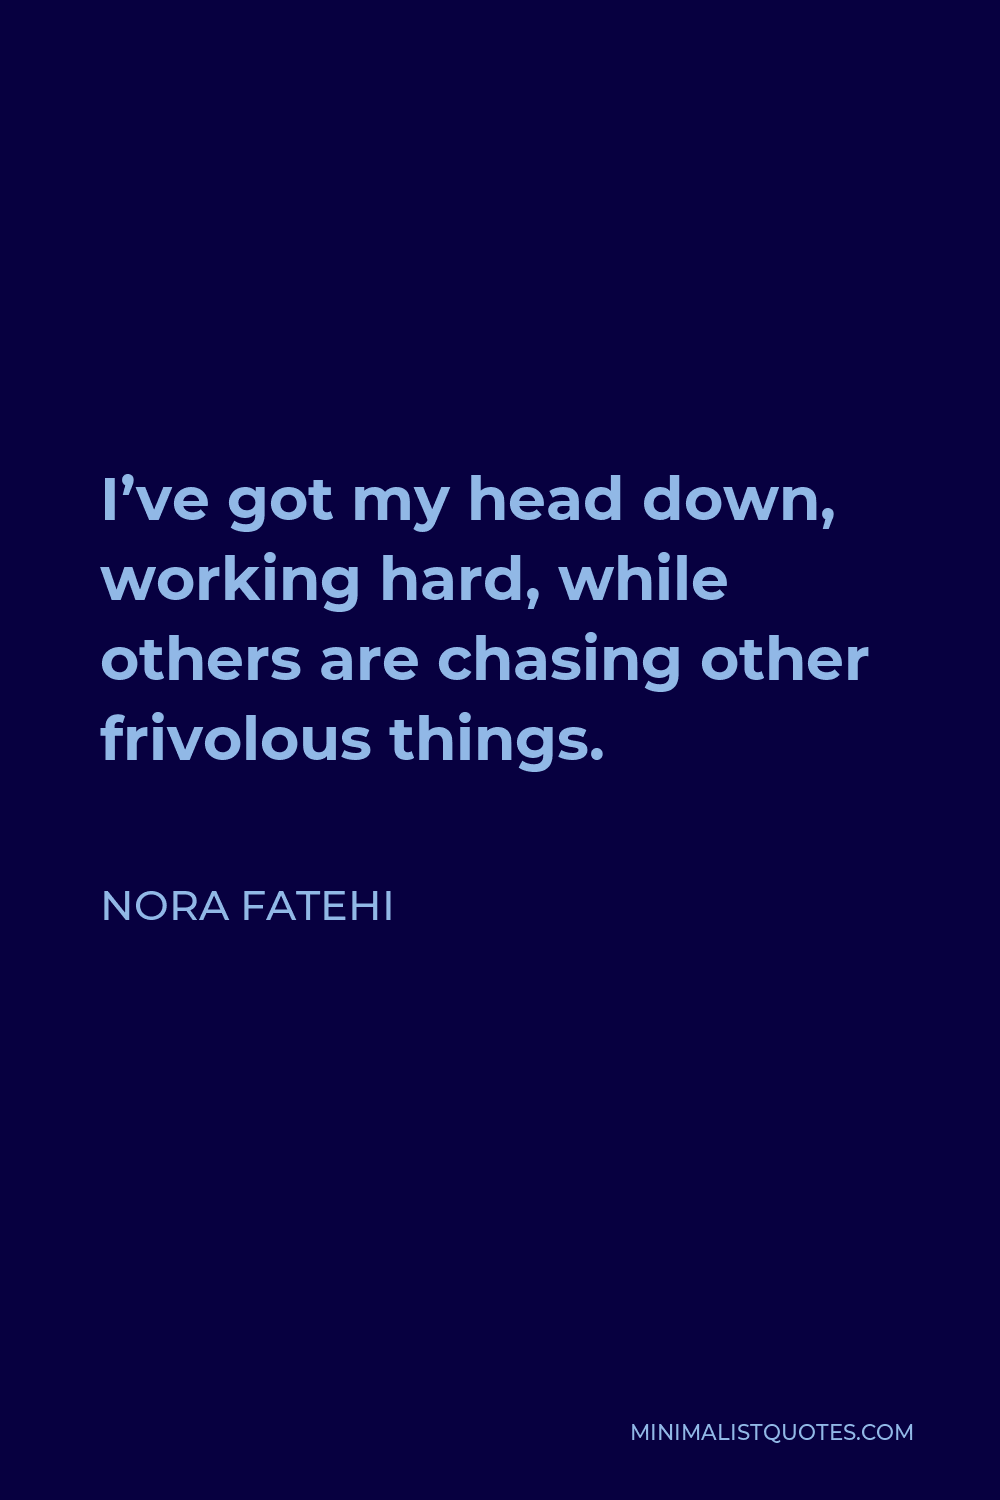 Nora Fatehi Quote - I’ve got my head down, working hard, while others are chasing other frivolous things.